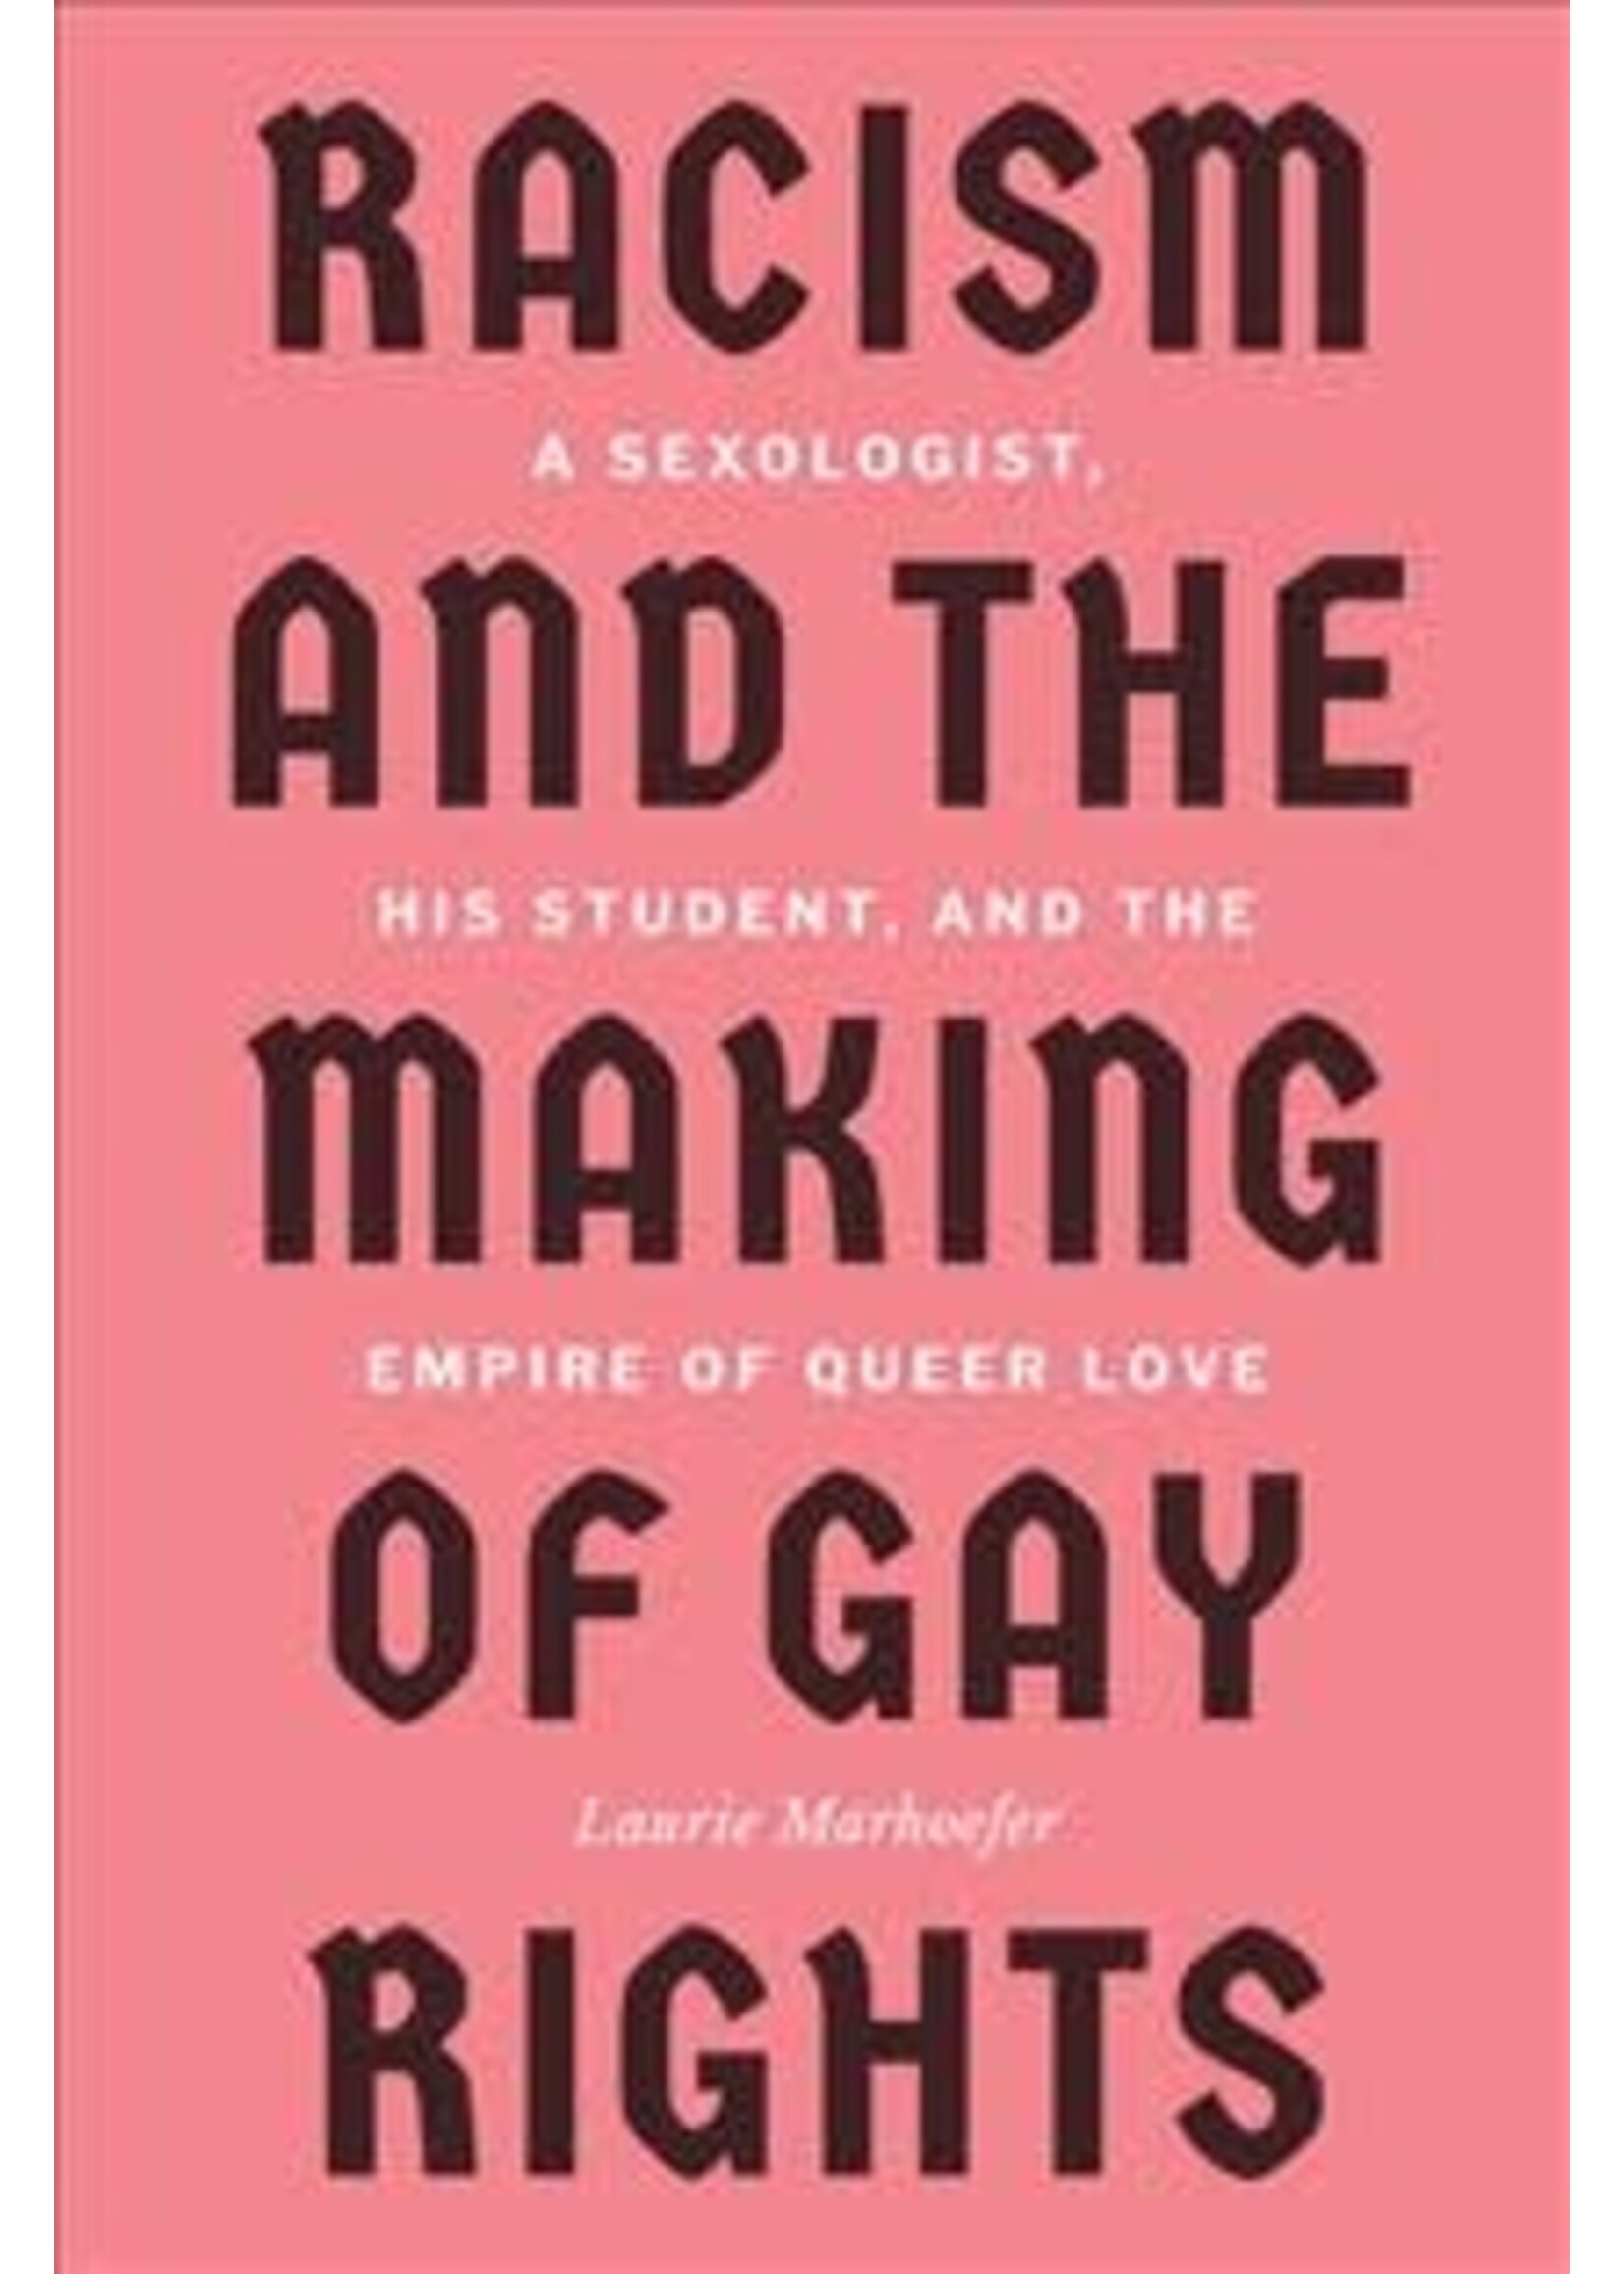 Racism and the Making of Gay Rights: A Sexologist, His Student, and the Empire of Queer Love by Laurie Marhoefer